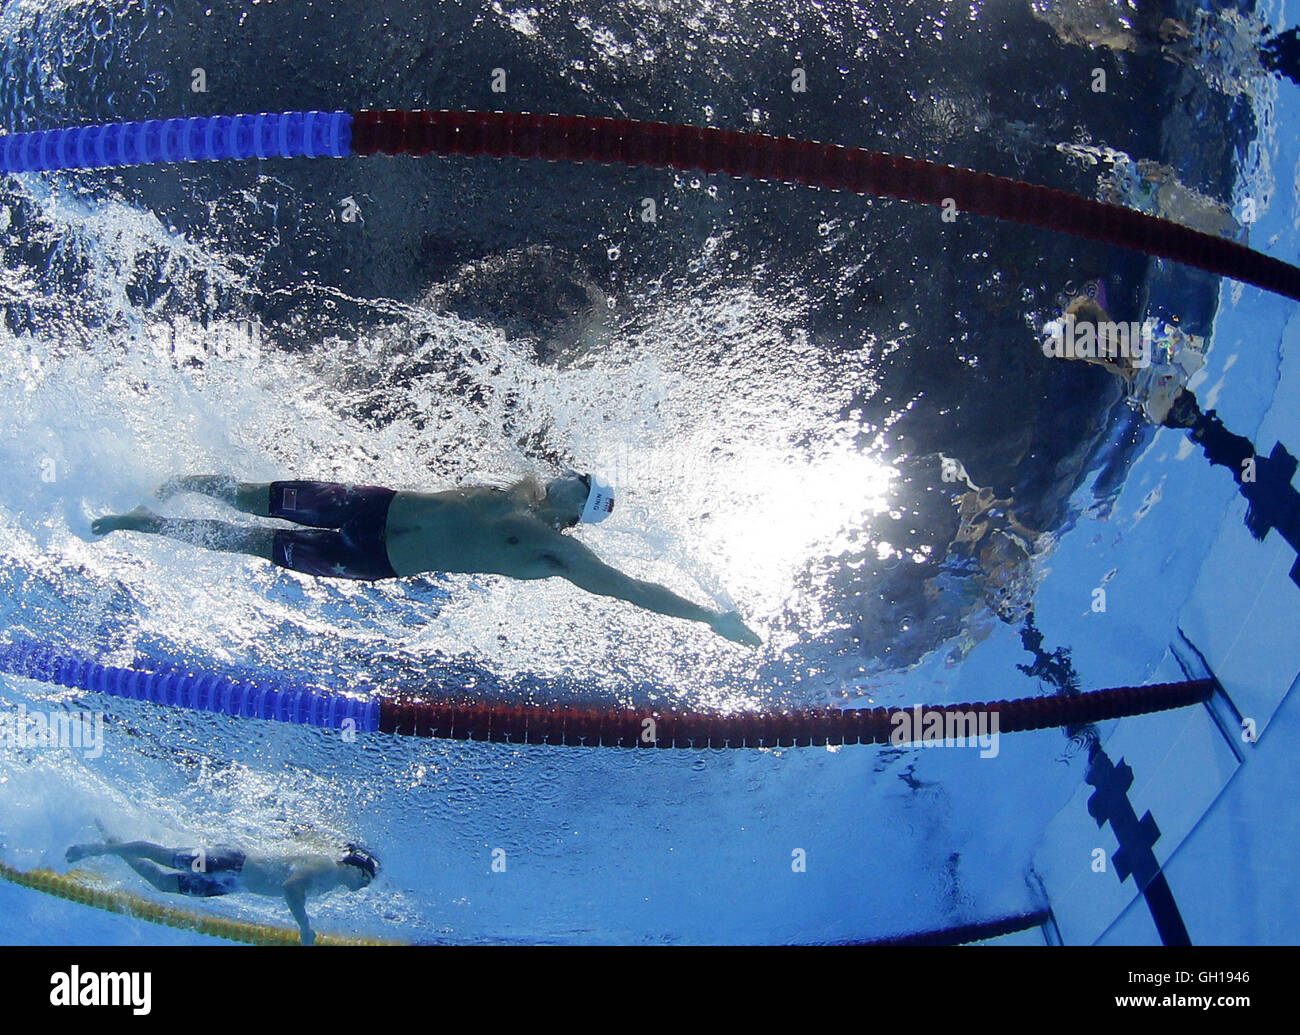 Rio de Janeiro, Brazil 07th Aug, 2016 Yu Hexin of China competes during a heat of men's 4X100m freestyle relay of swimming at the 2016 Rio Olympic Games in Rio de Janeiro, Brazil, on Aug. 7, 2016. Credit:  Xinhua/Alamy Live News Stock Photo